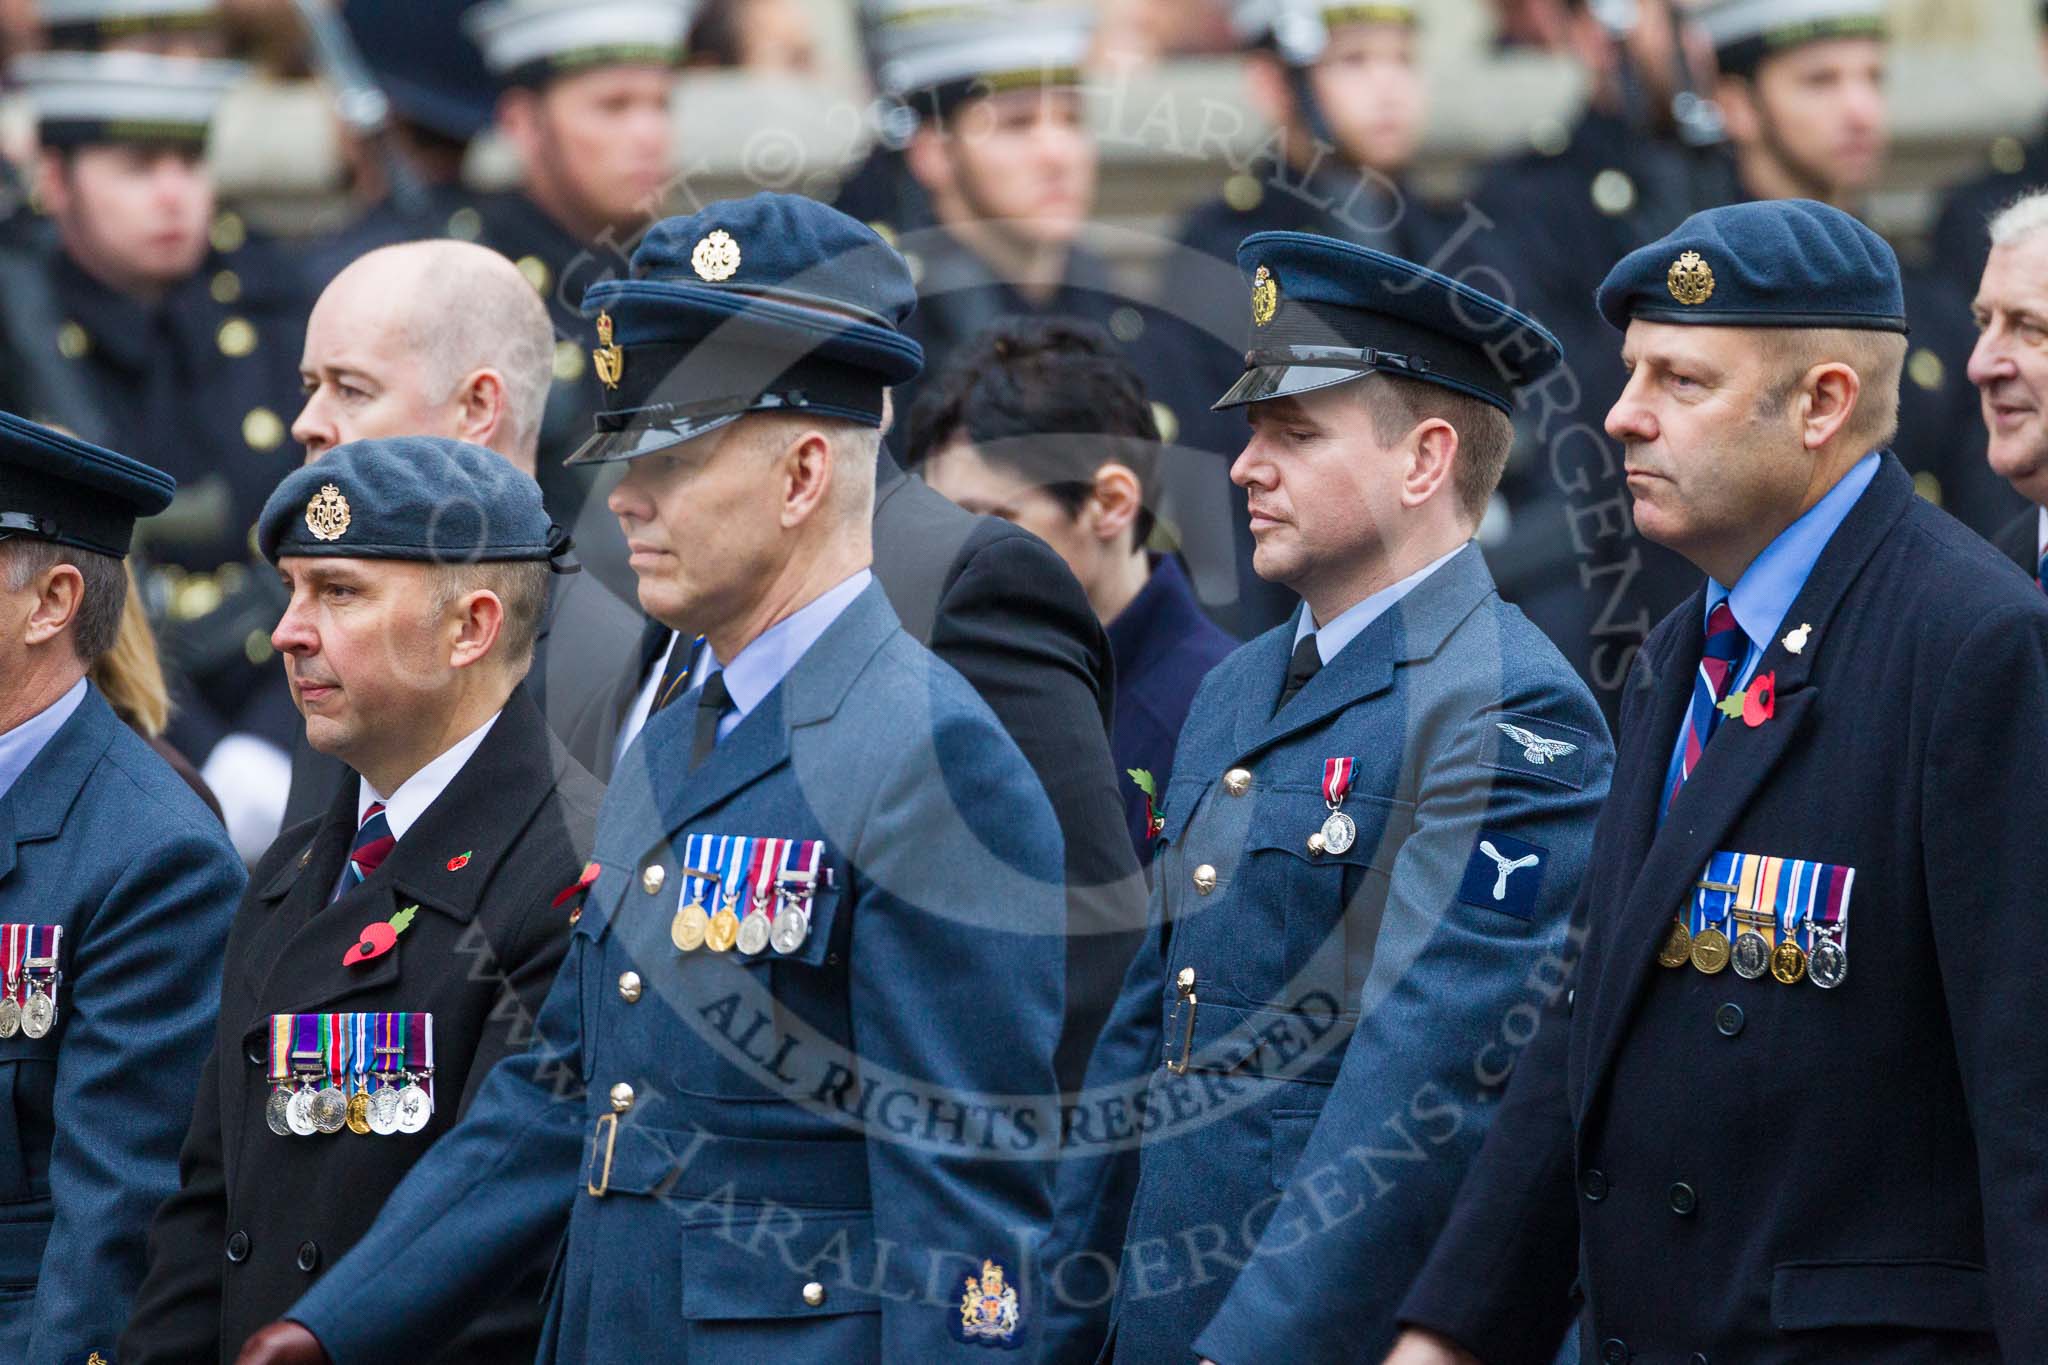 Remembrance Sunday at the Cenotaph 2015: Group C16, RAFSE(s) Assoc (New for 2015).
Cenotaph, Whitehall, London SW1,
London,
Greater London,
United Kingdom,
on 08 November 2015 at 11:49, image #512